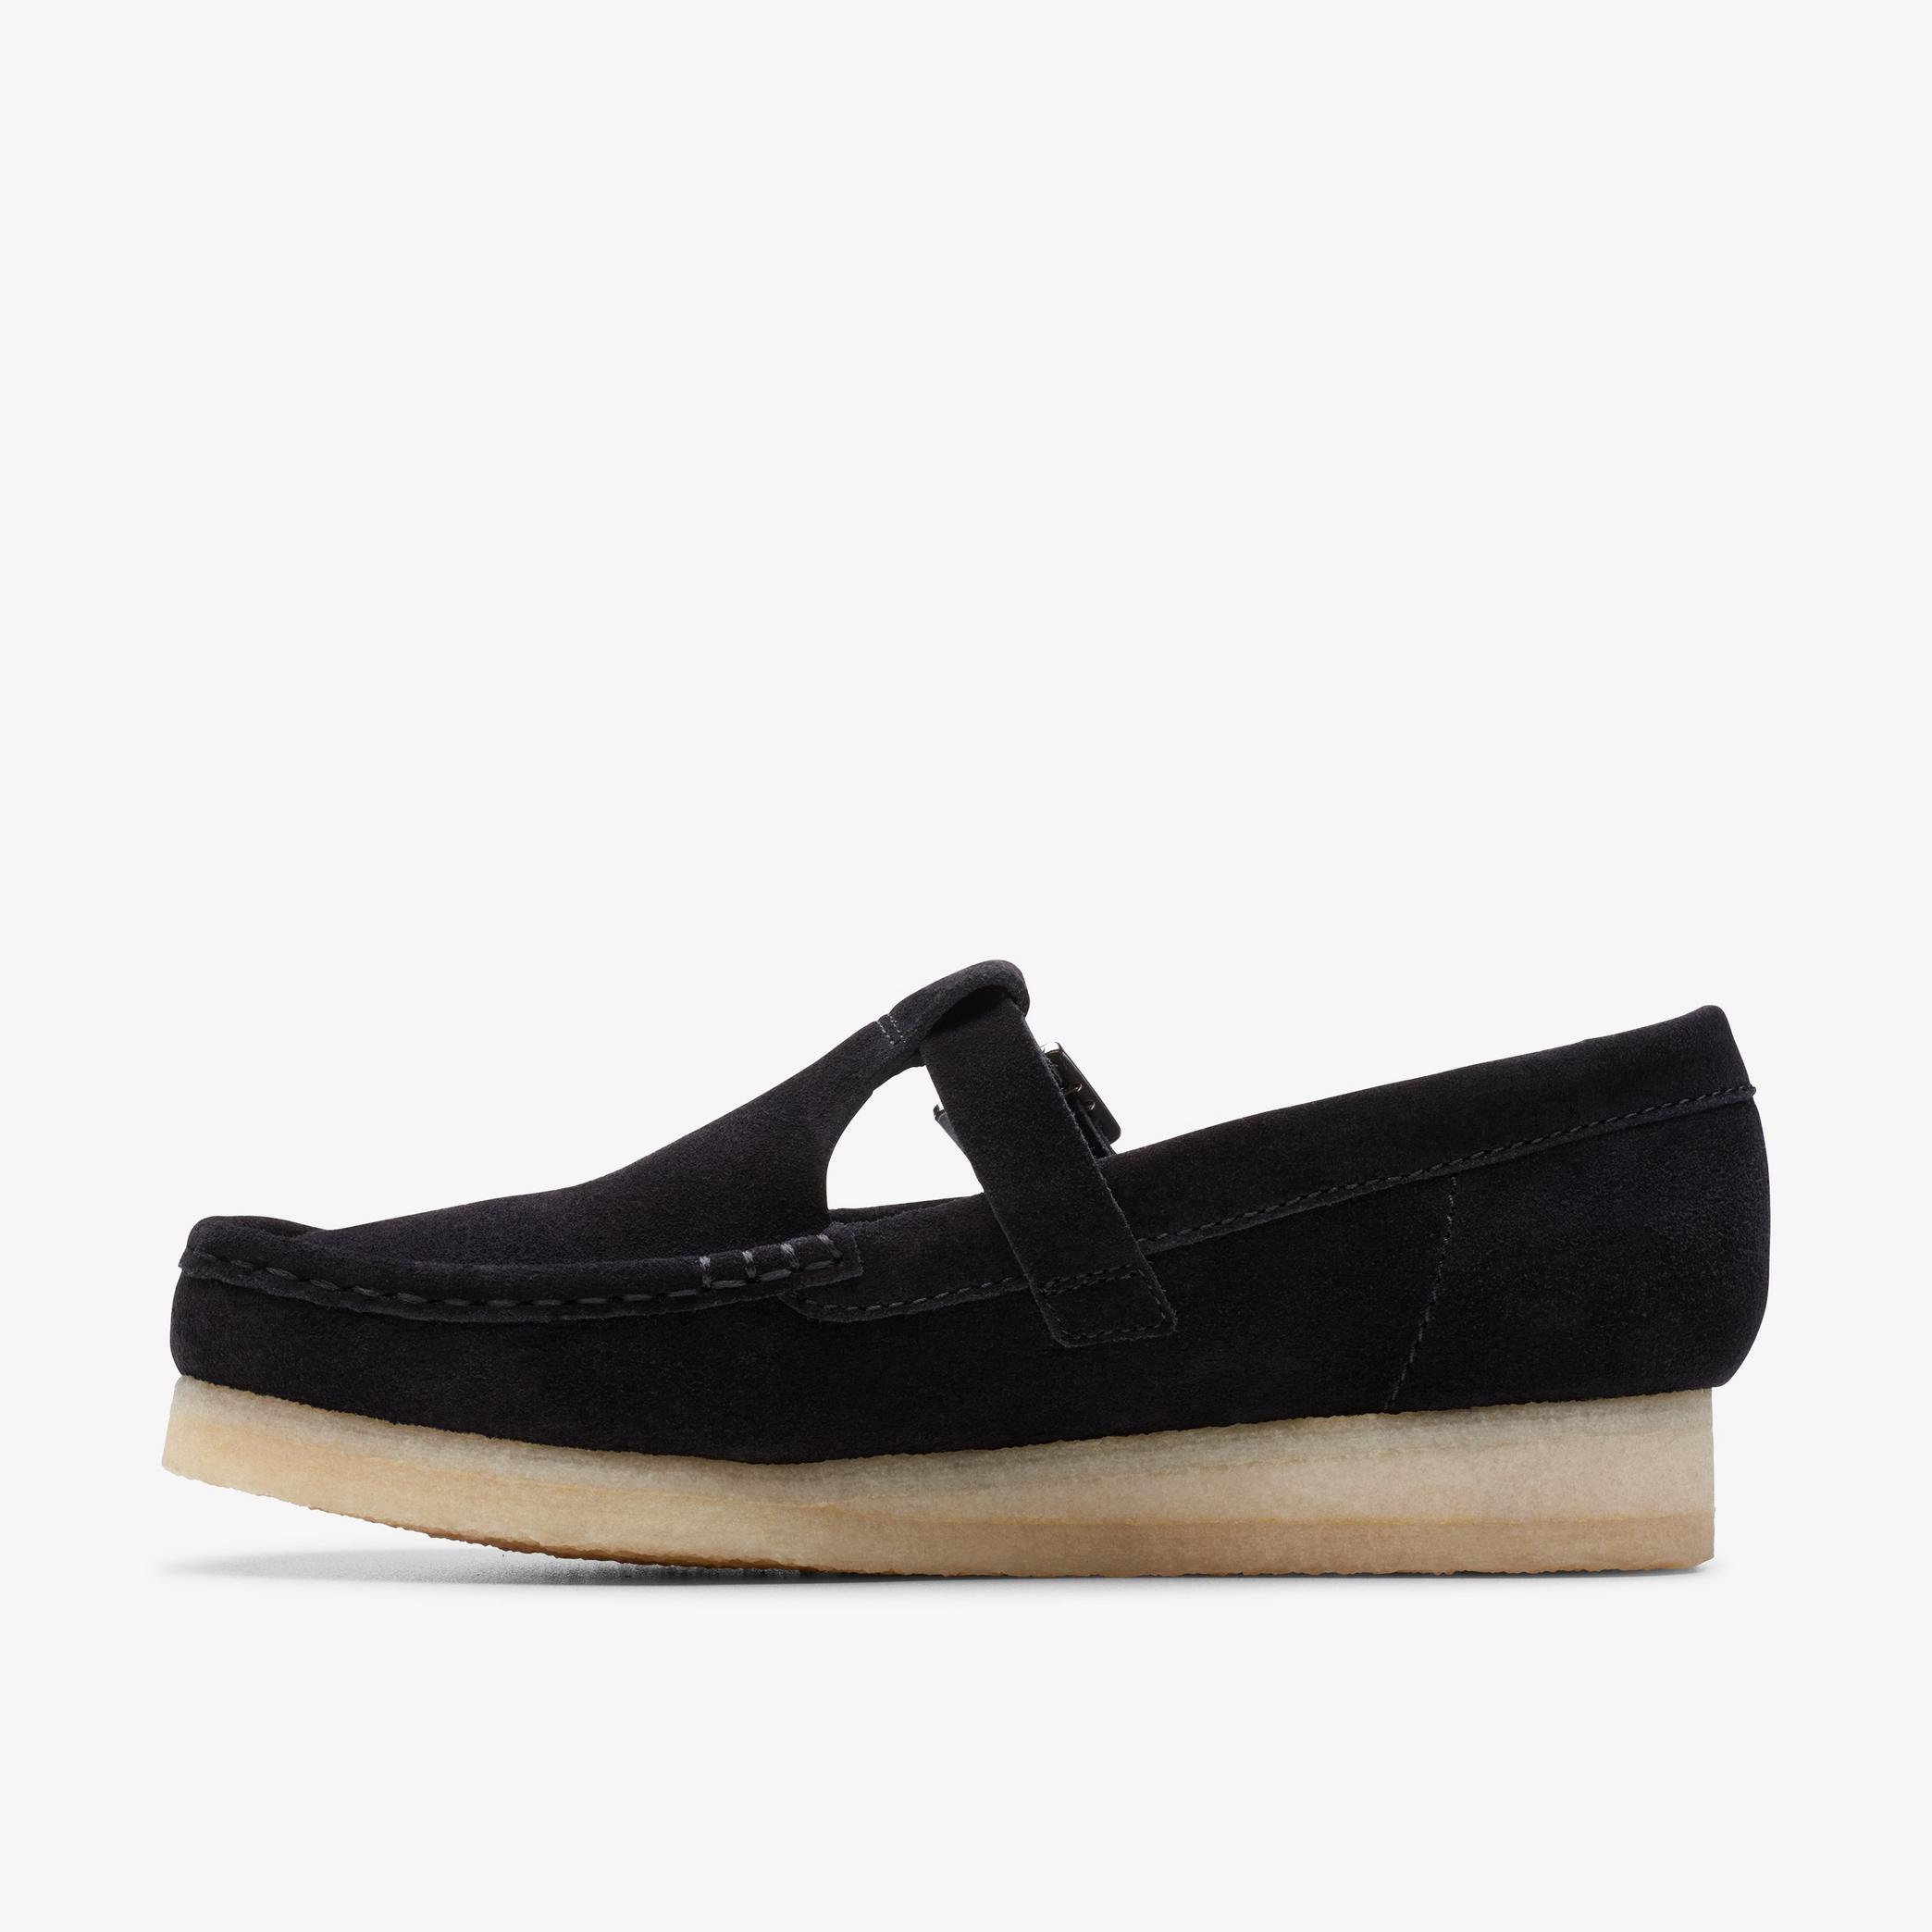 Wallabee T Bar Black Suede Loafers, view 2 of 6